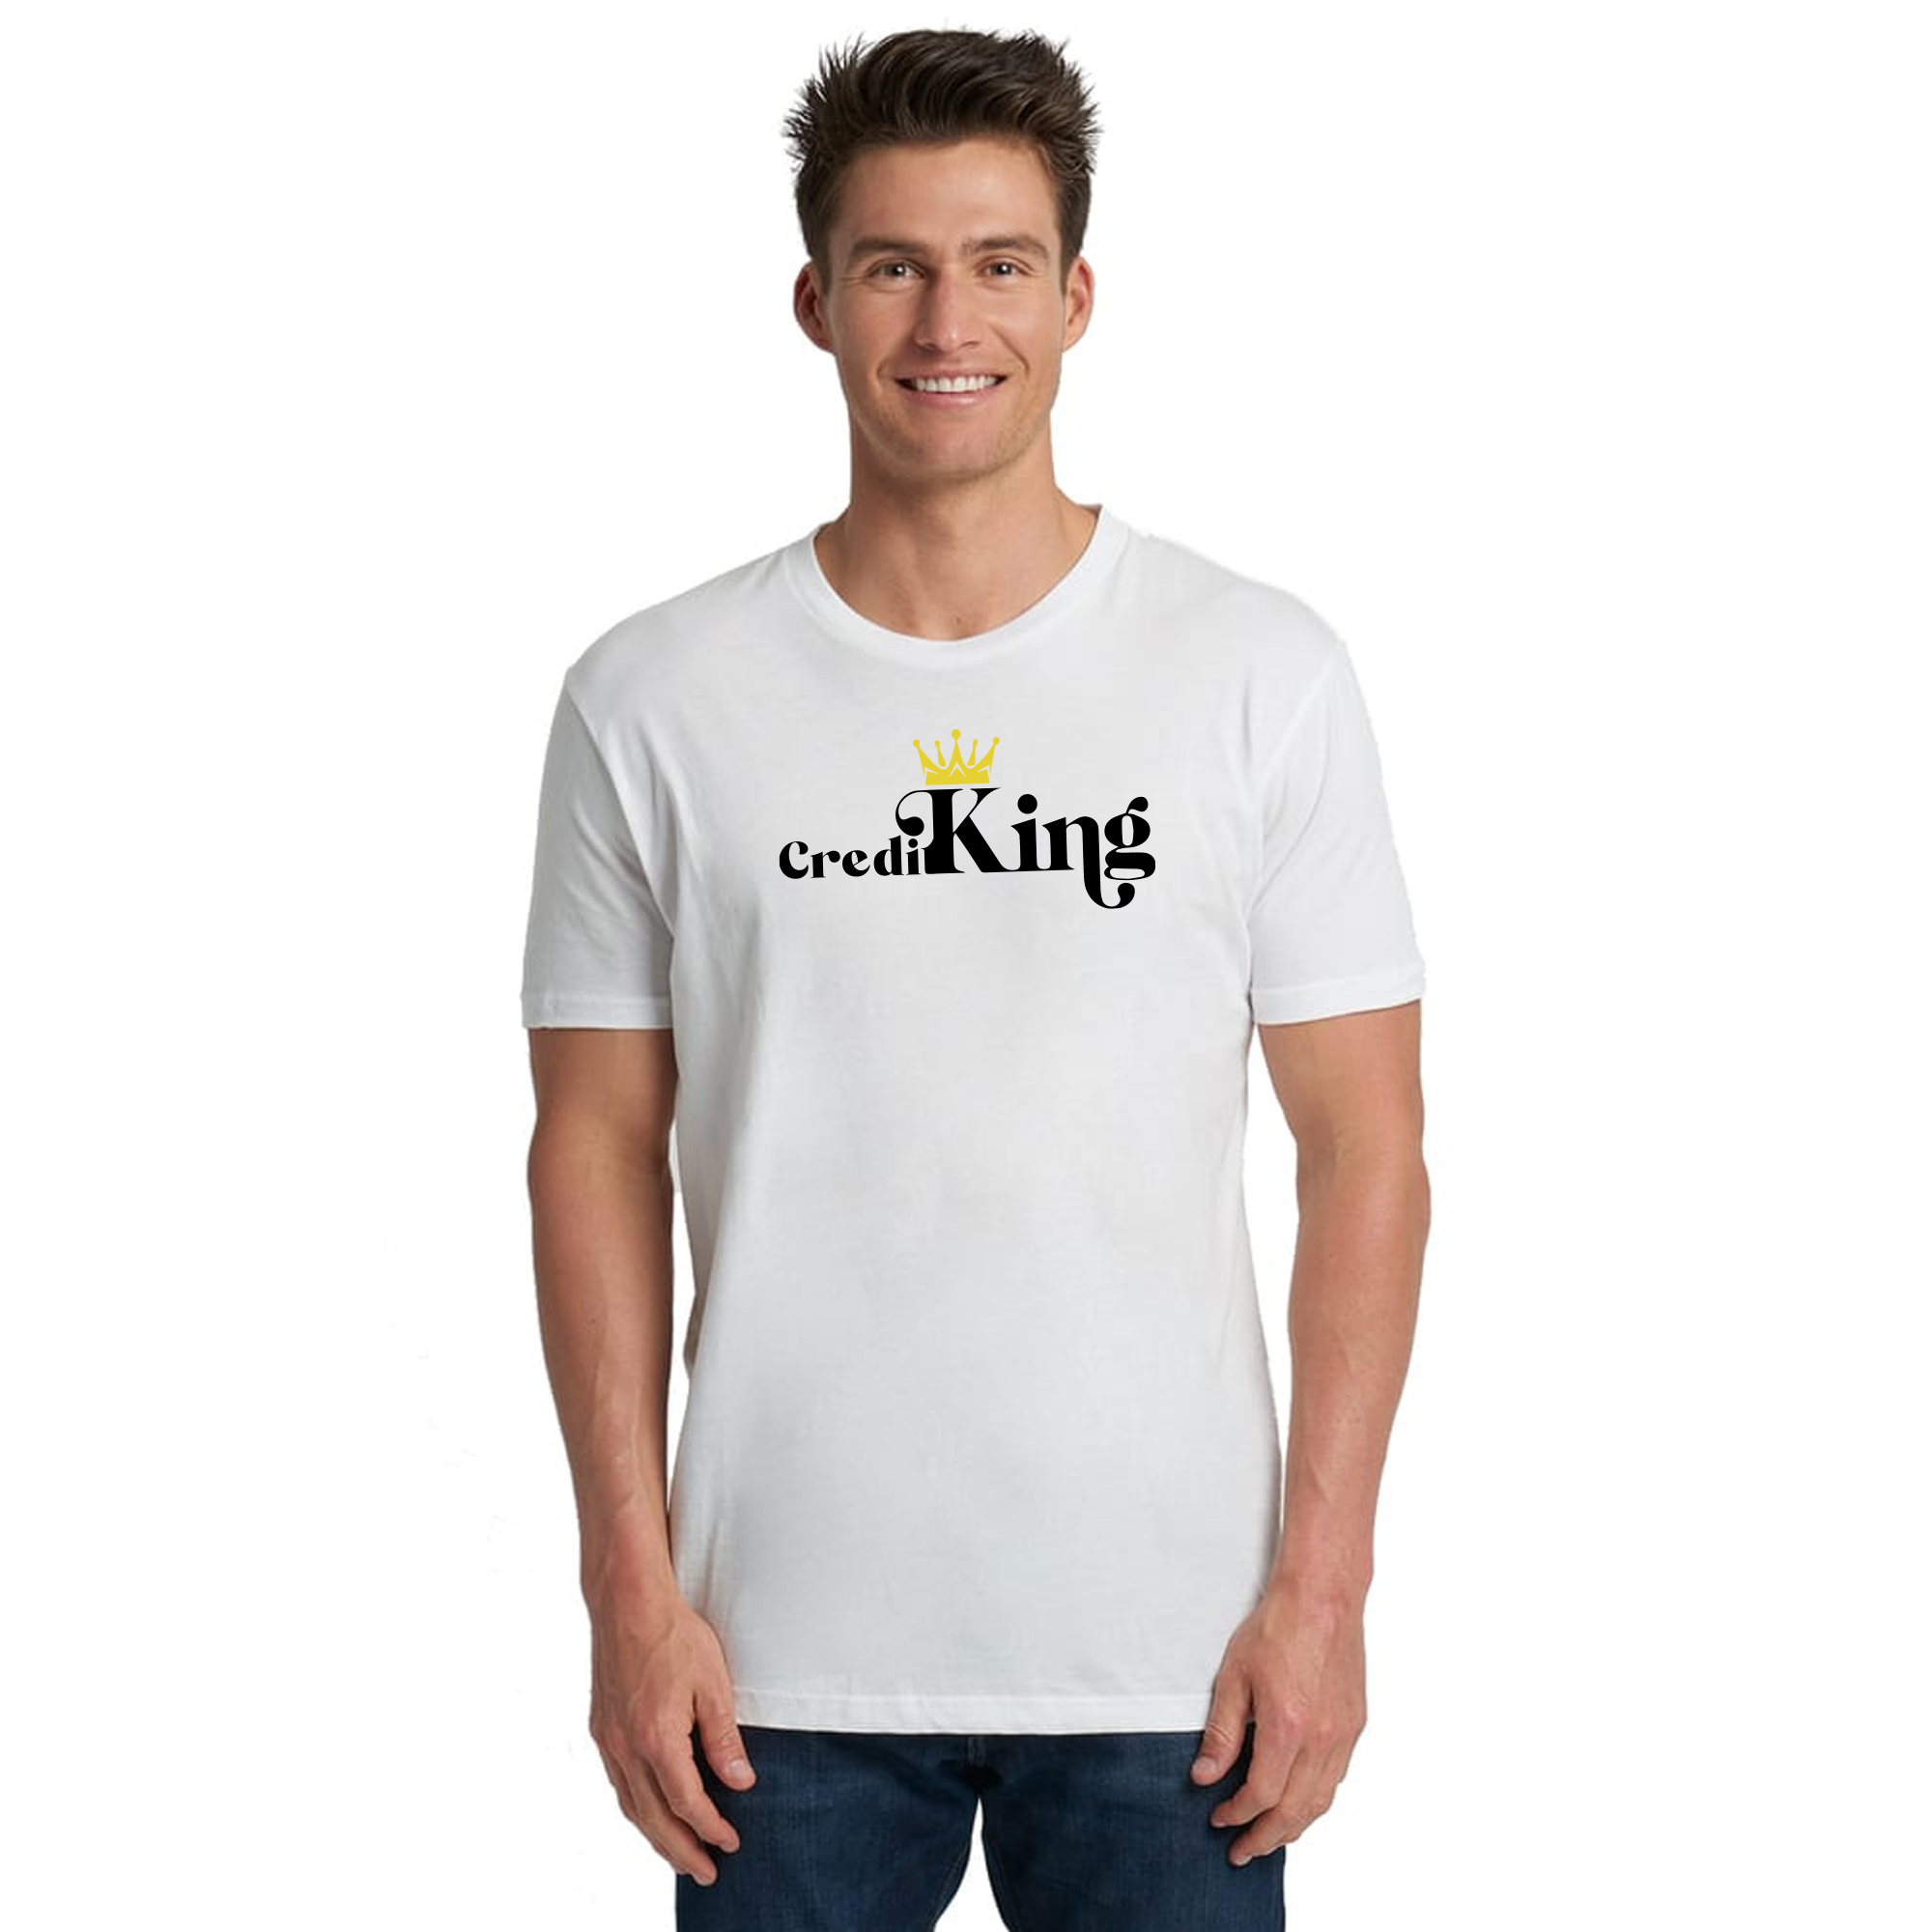 Mens White T Shirt - CreditKing - Crown Office Supplies